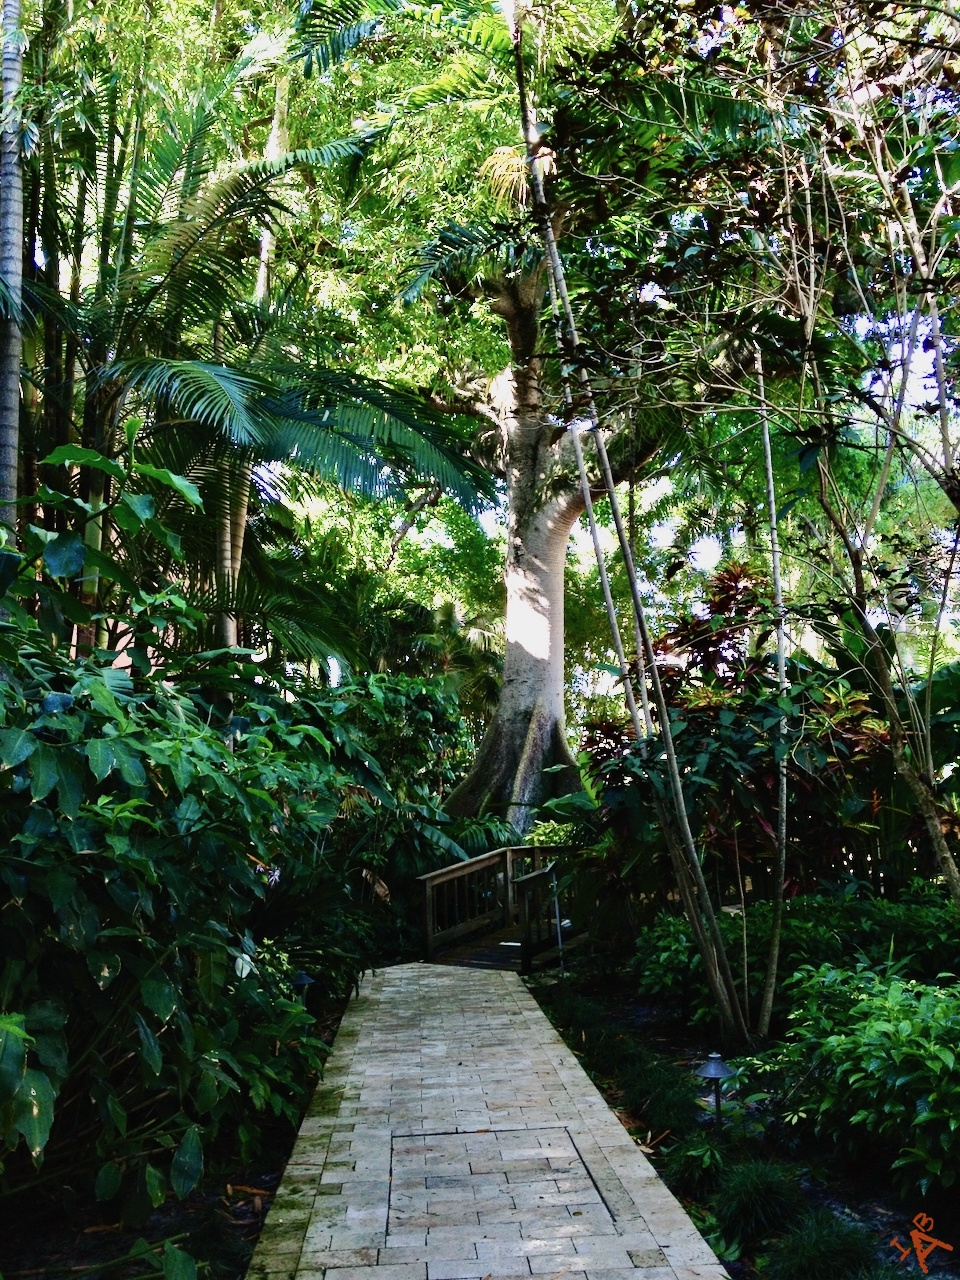 A walking path into a tropical, wooden area.